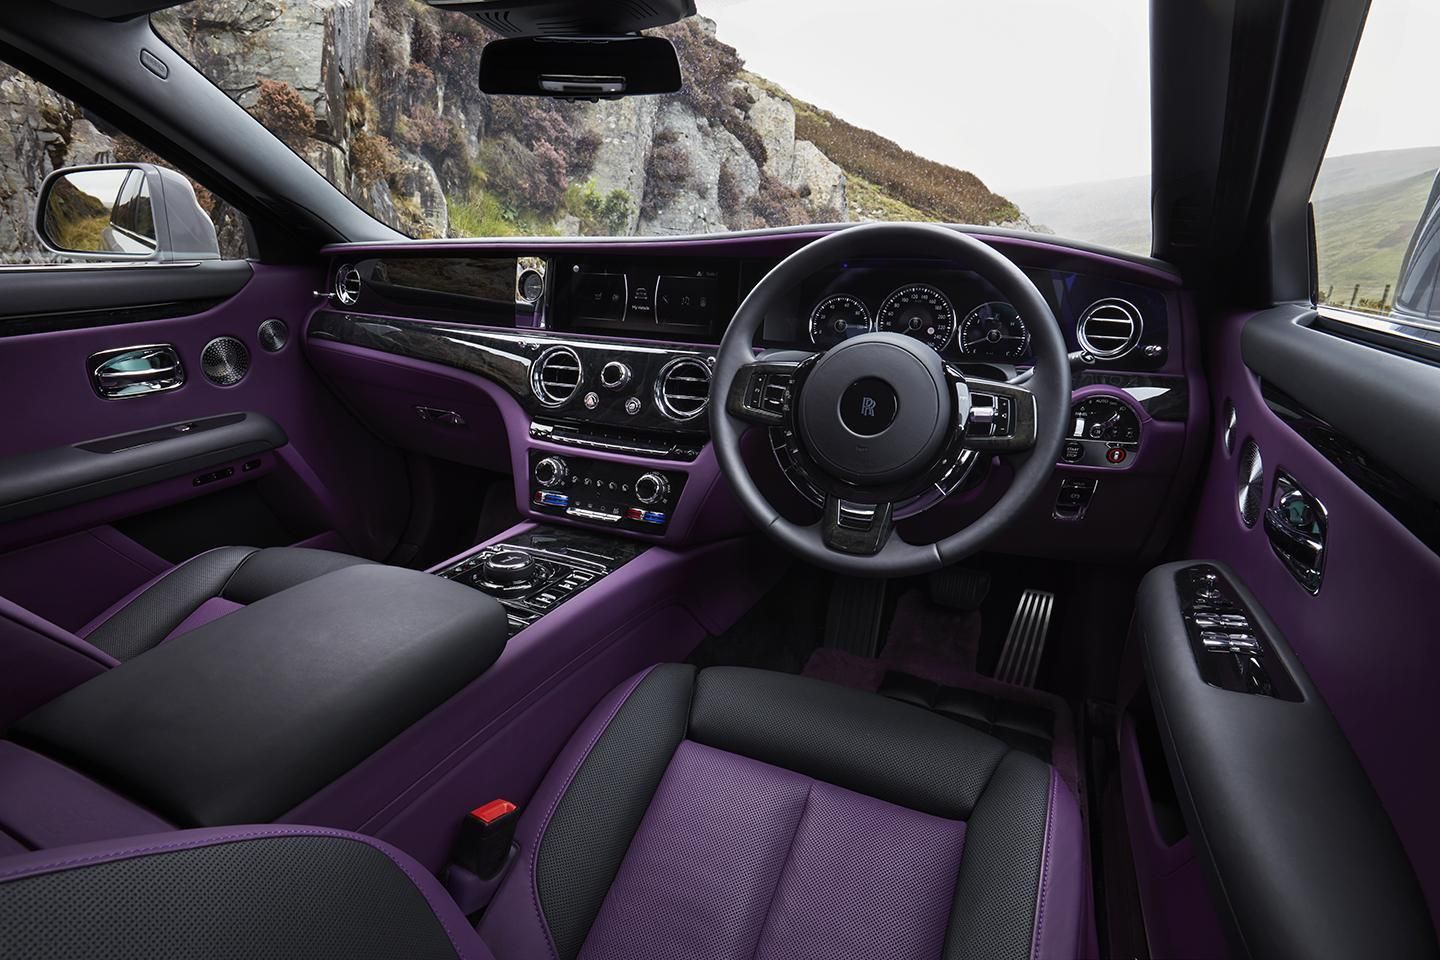 Motor Magnet on Twitter The brand new RollsRoyce Phantom 8 has arrived  in South Africa ahead of its launch next month Looking incredibly regal  in midnight purple Yours for a cool R15